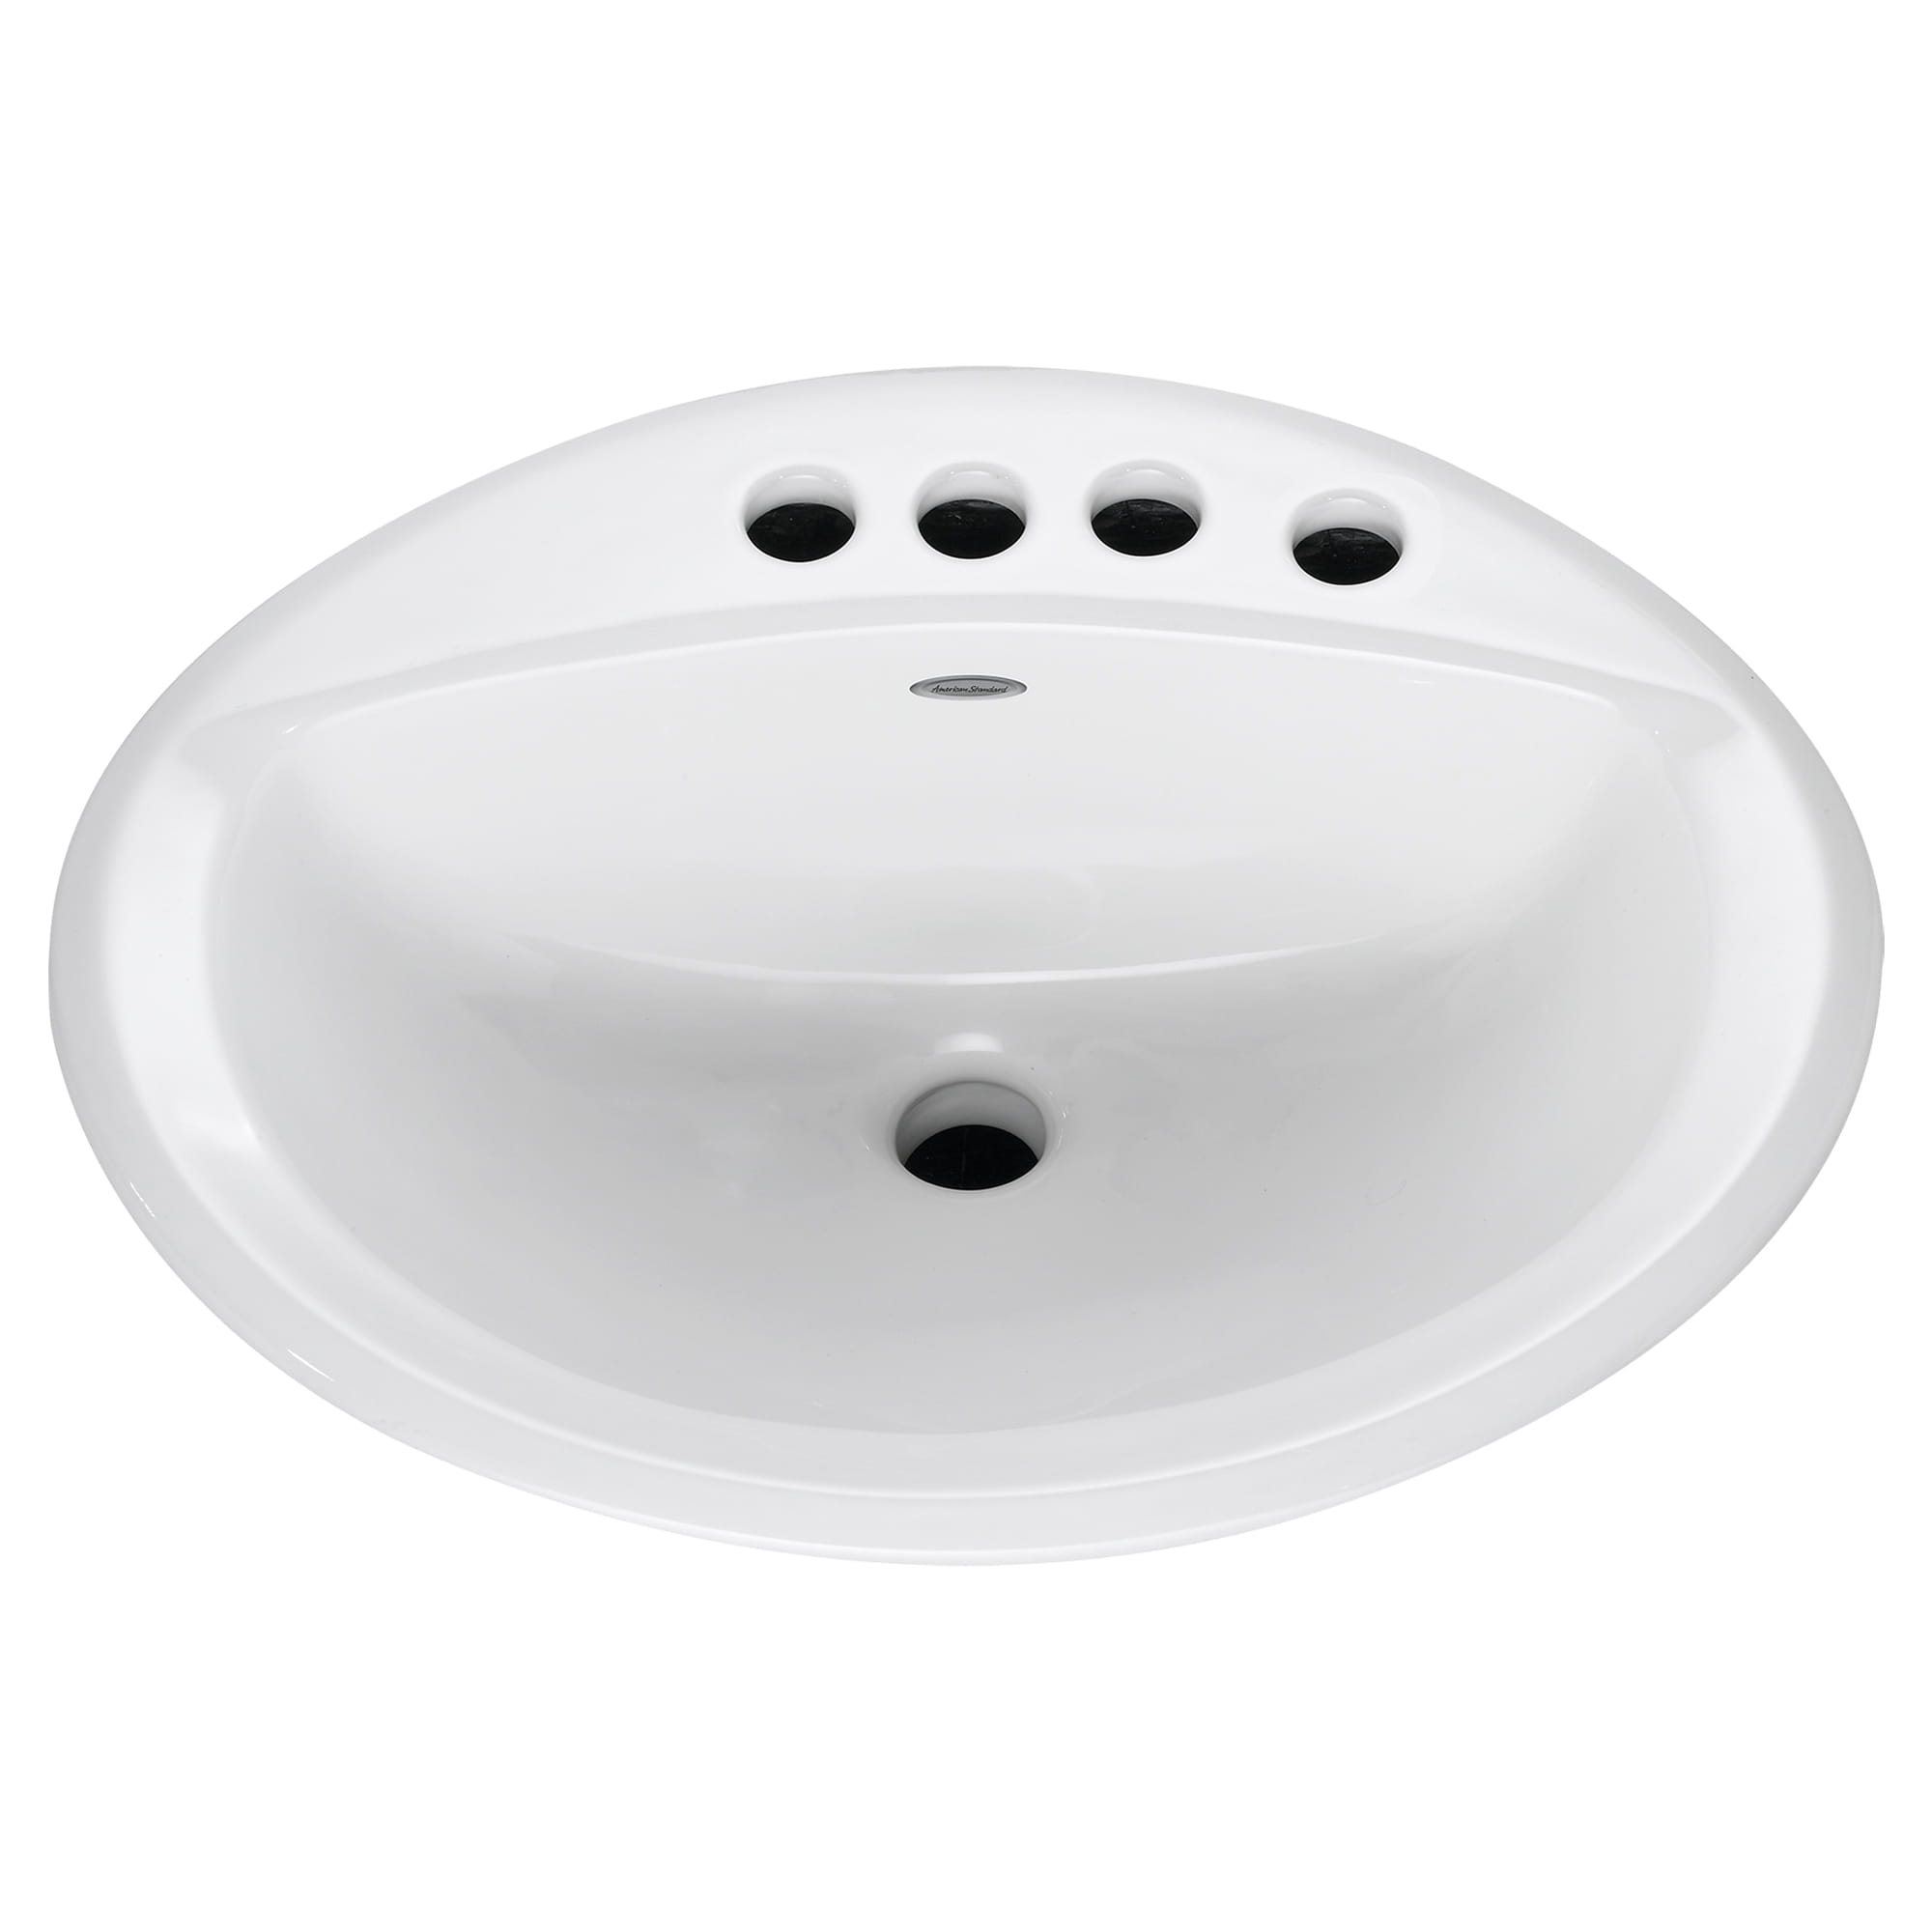 Aqualyn® Drop-In Sink With 4-Inch Centerset and Extra Right-Hand Hole